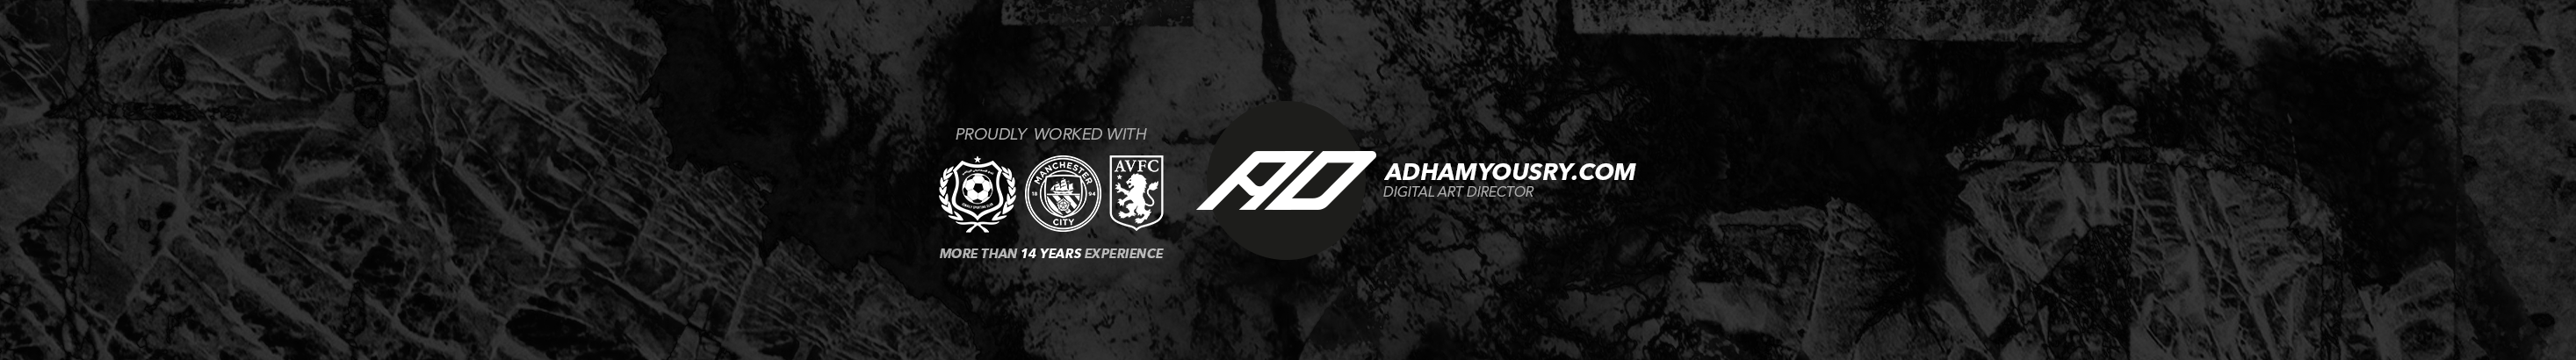 Adham Yousry's profile banner